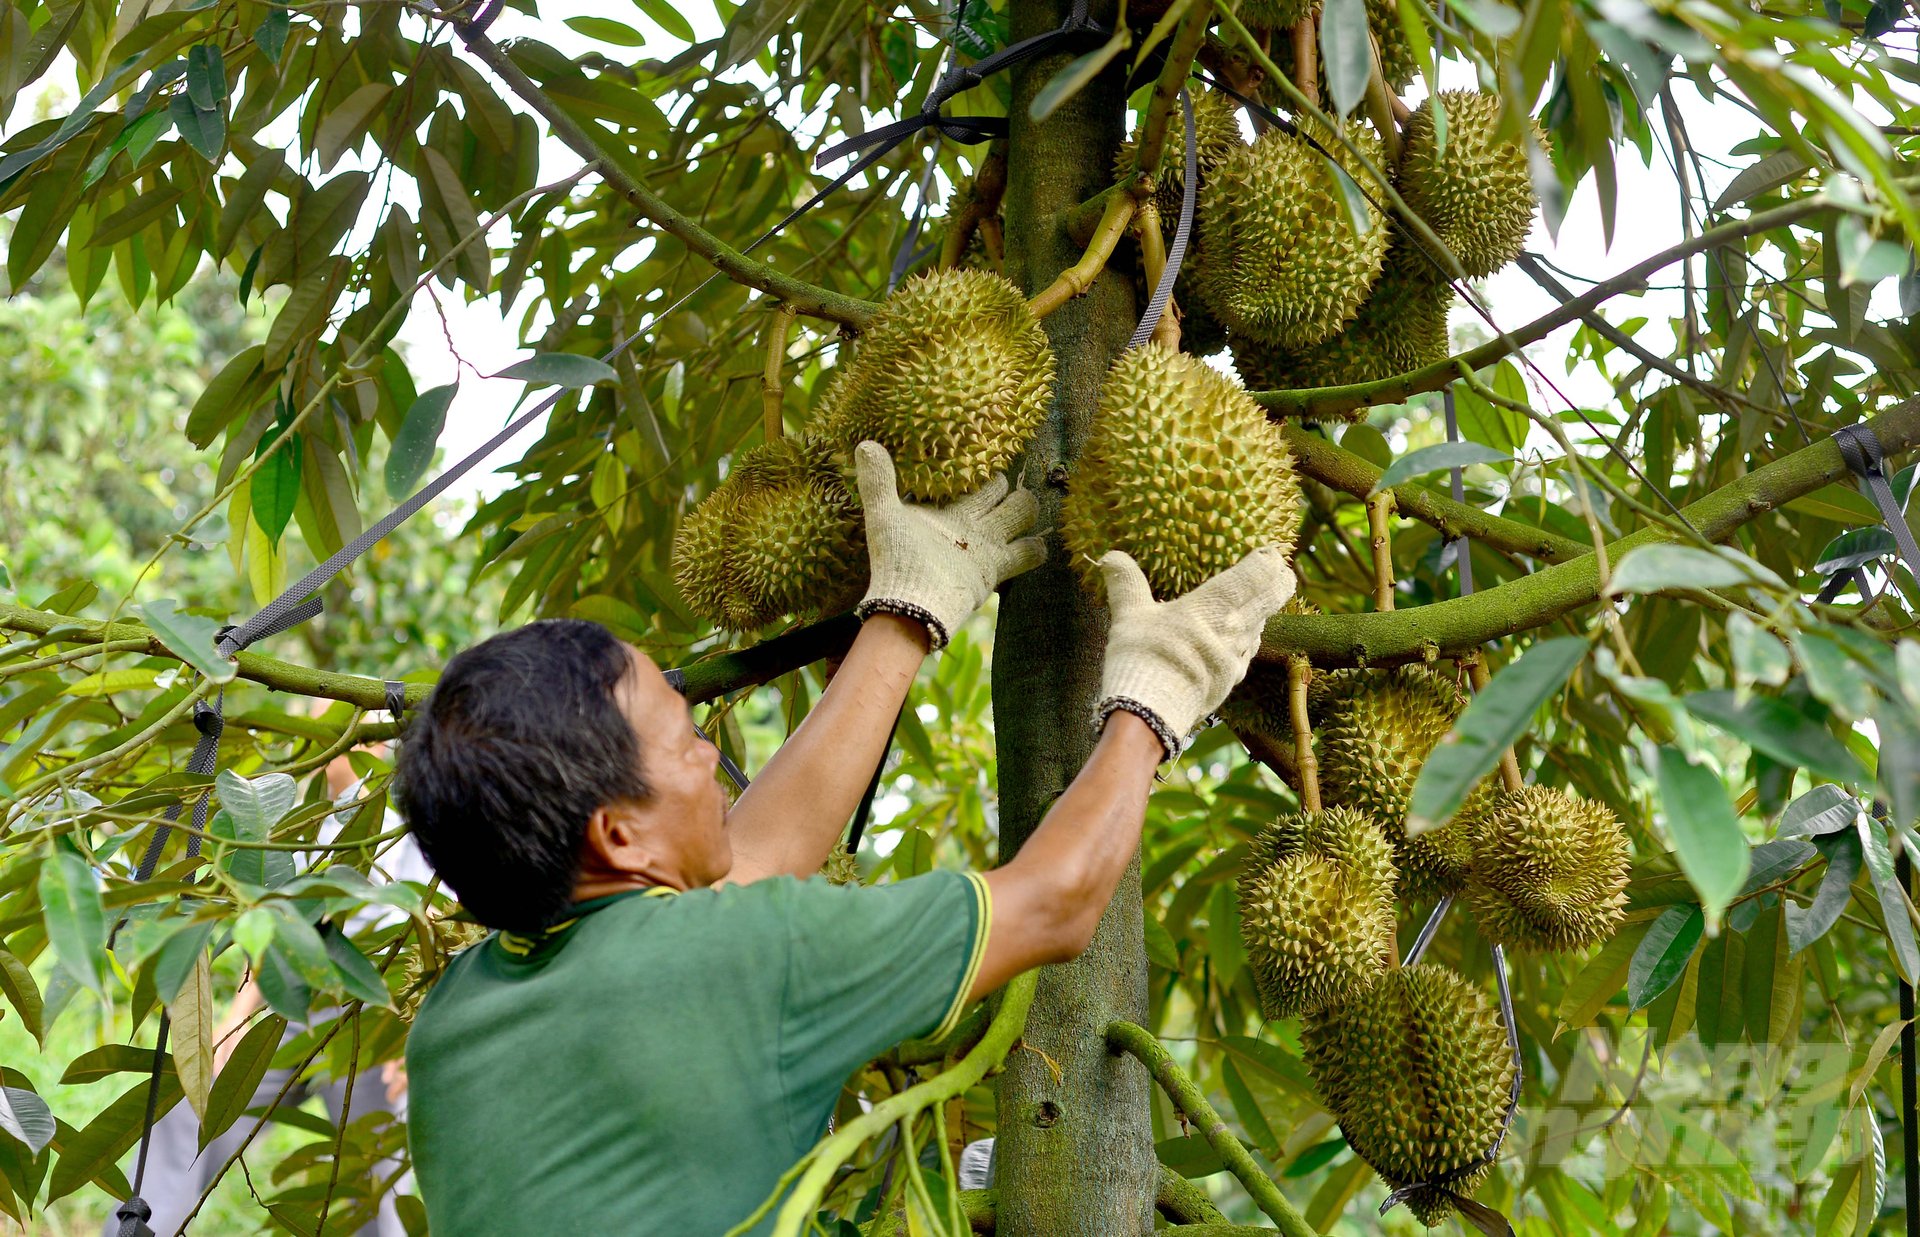 Dam Rong district is switching inefficient crop areas to durian in order to improve production value and increase income for local farmers. Photo: Minh Hau.